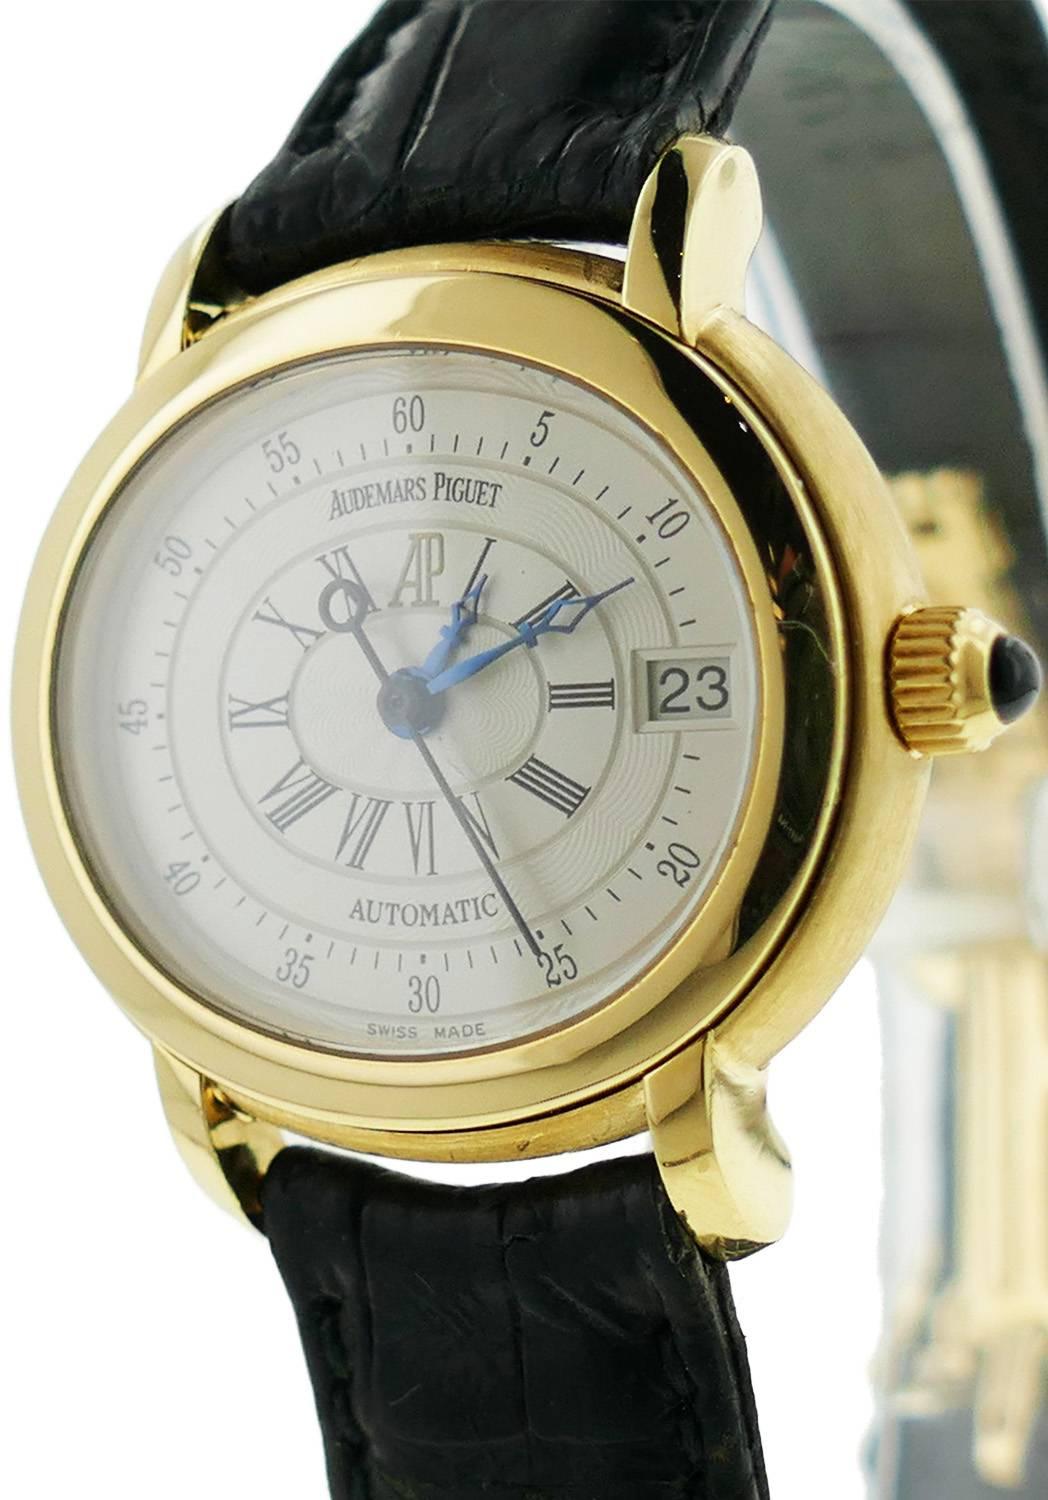 Ladies (27mm) Audemars Piguet Millenary 18k Yellow Gold Wrist Watch. The Watch is in Excellent Condition & Keeping Perfect Time; Movement is Powered by Automatic Mechanical Winding. The Watch is on a AP Strap & 18k Deployment Buckle. No box